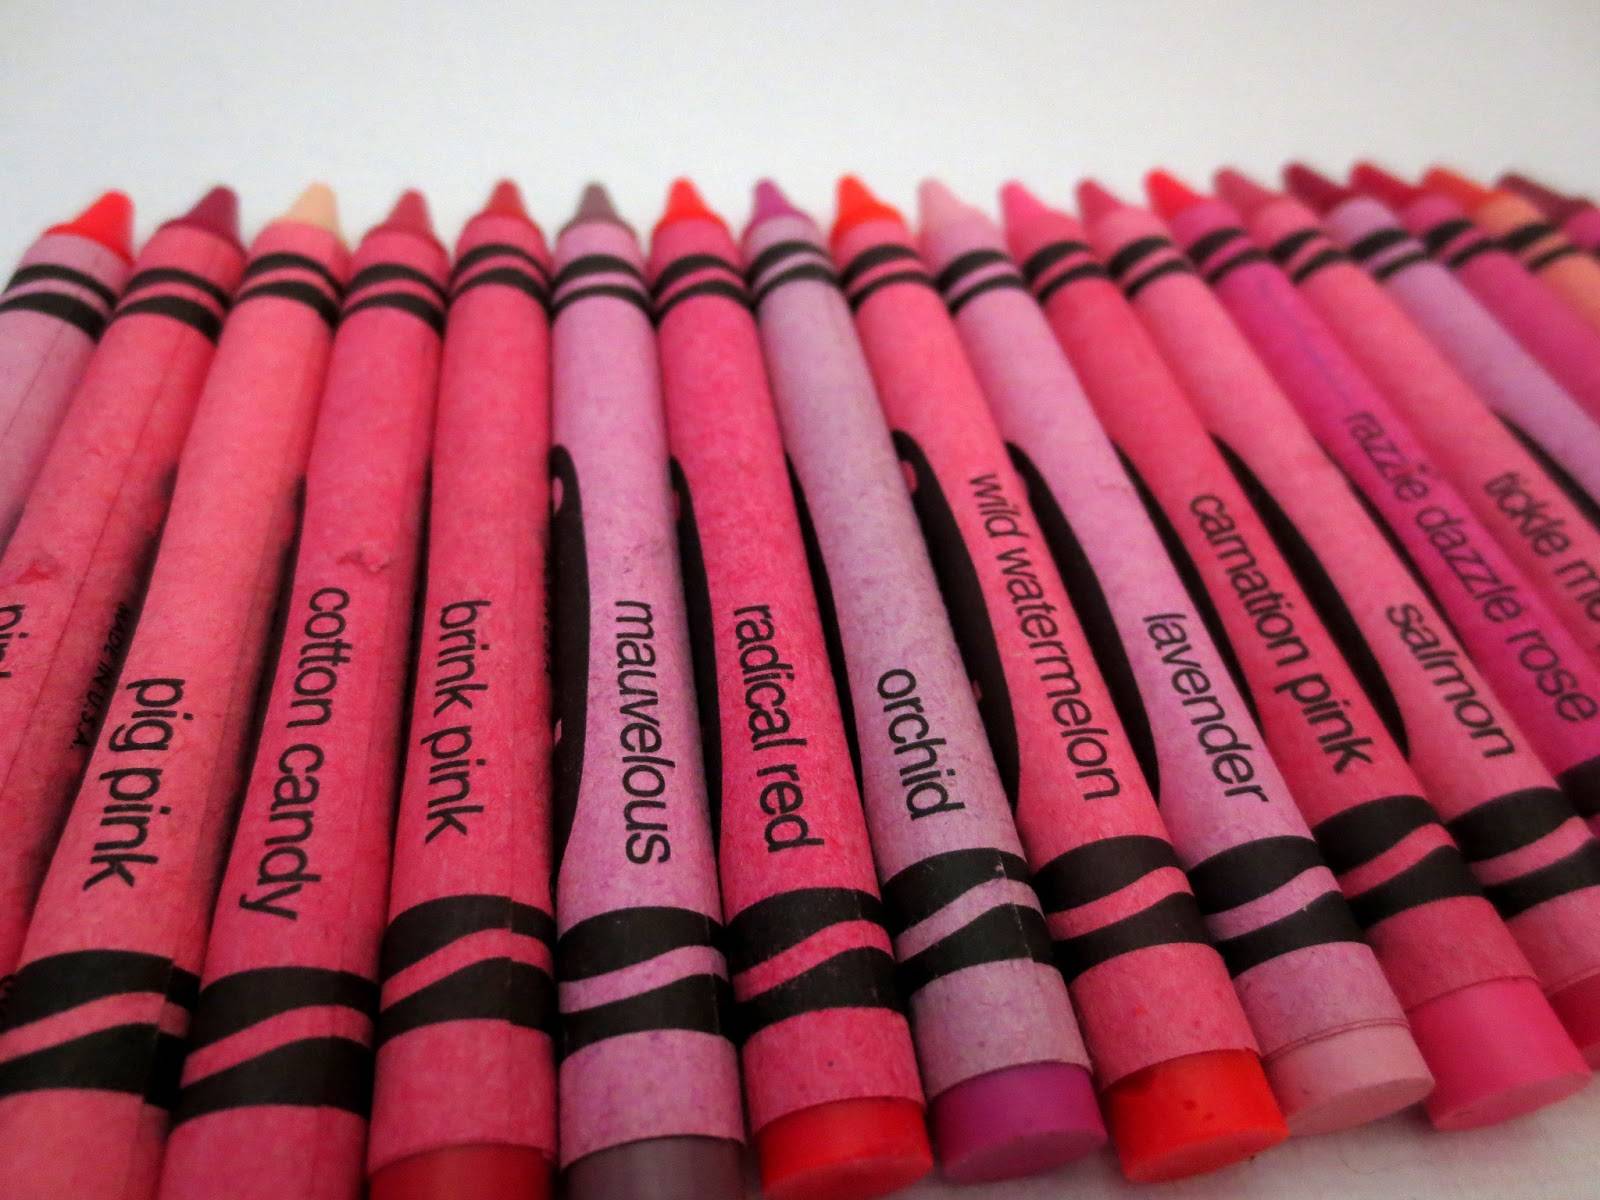 Pink crayons lined up.